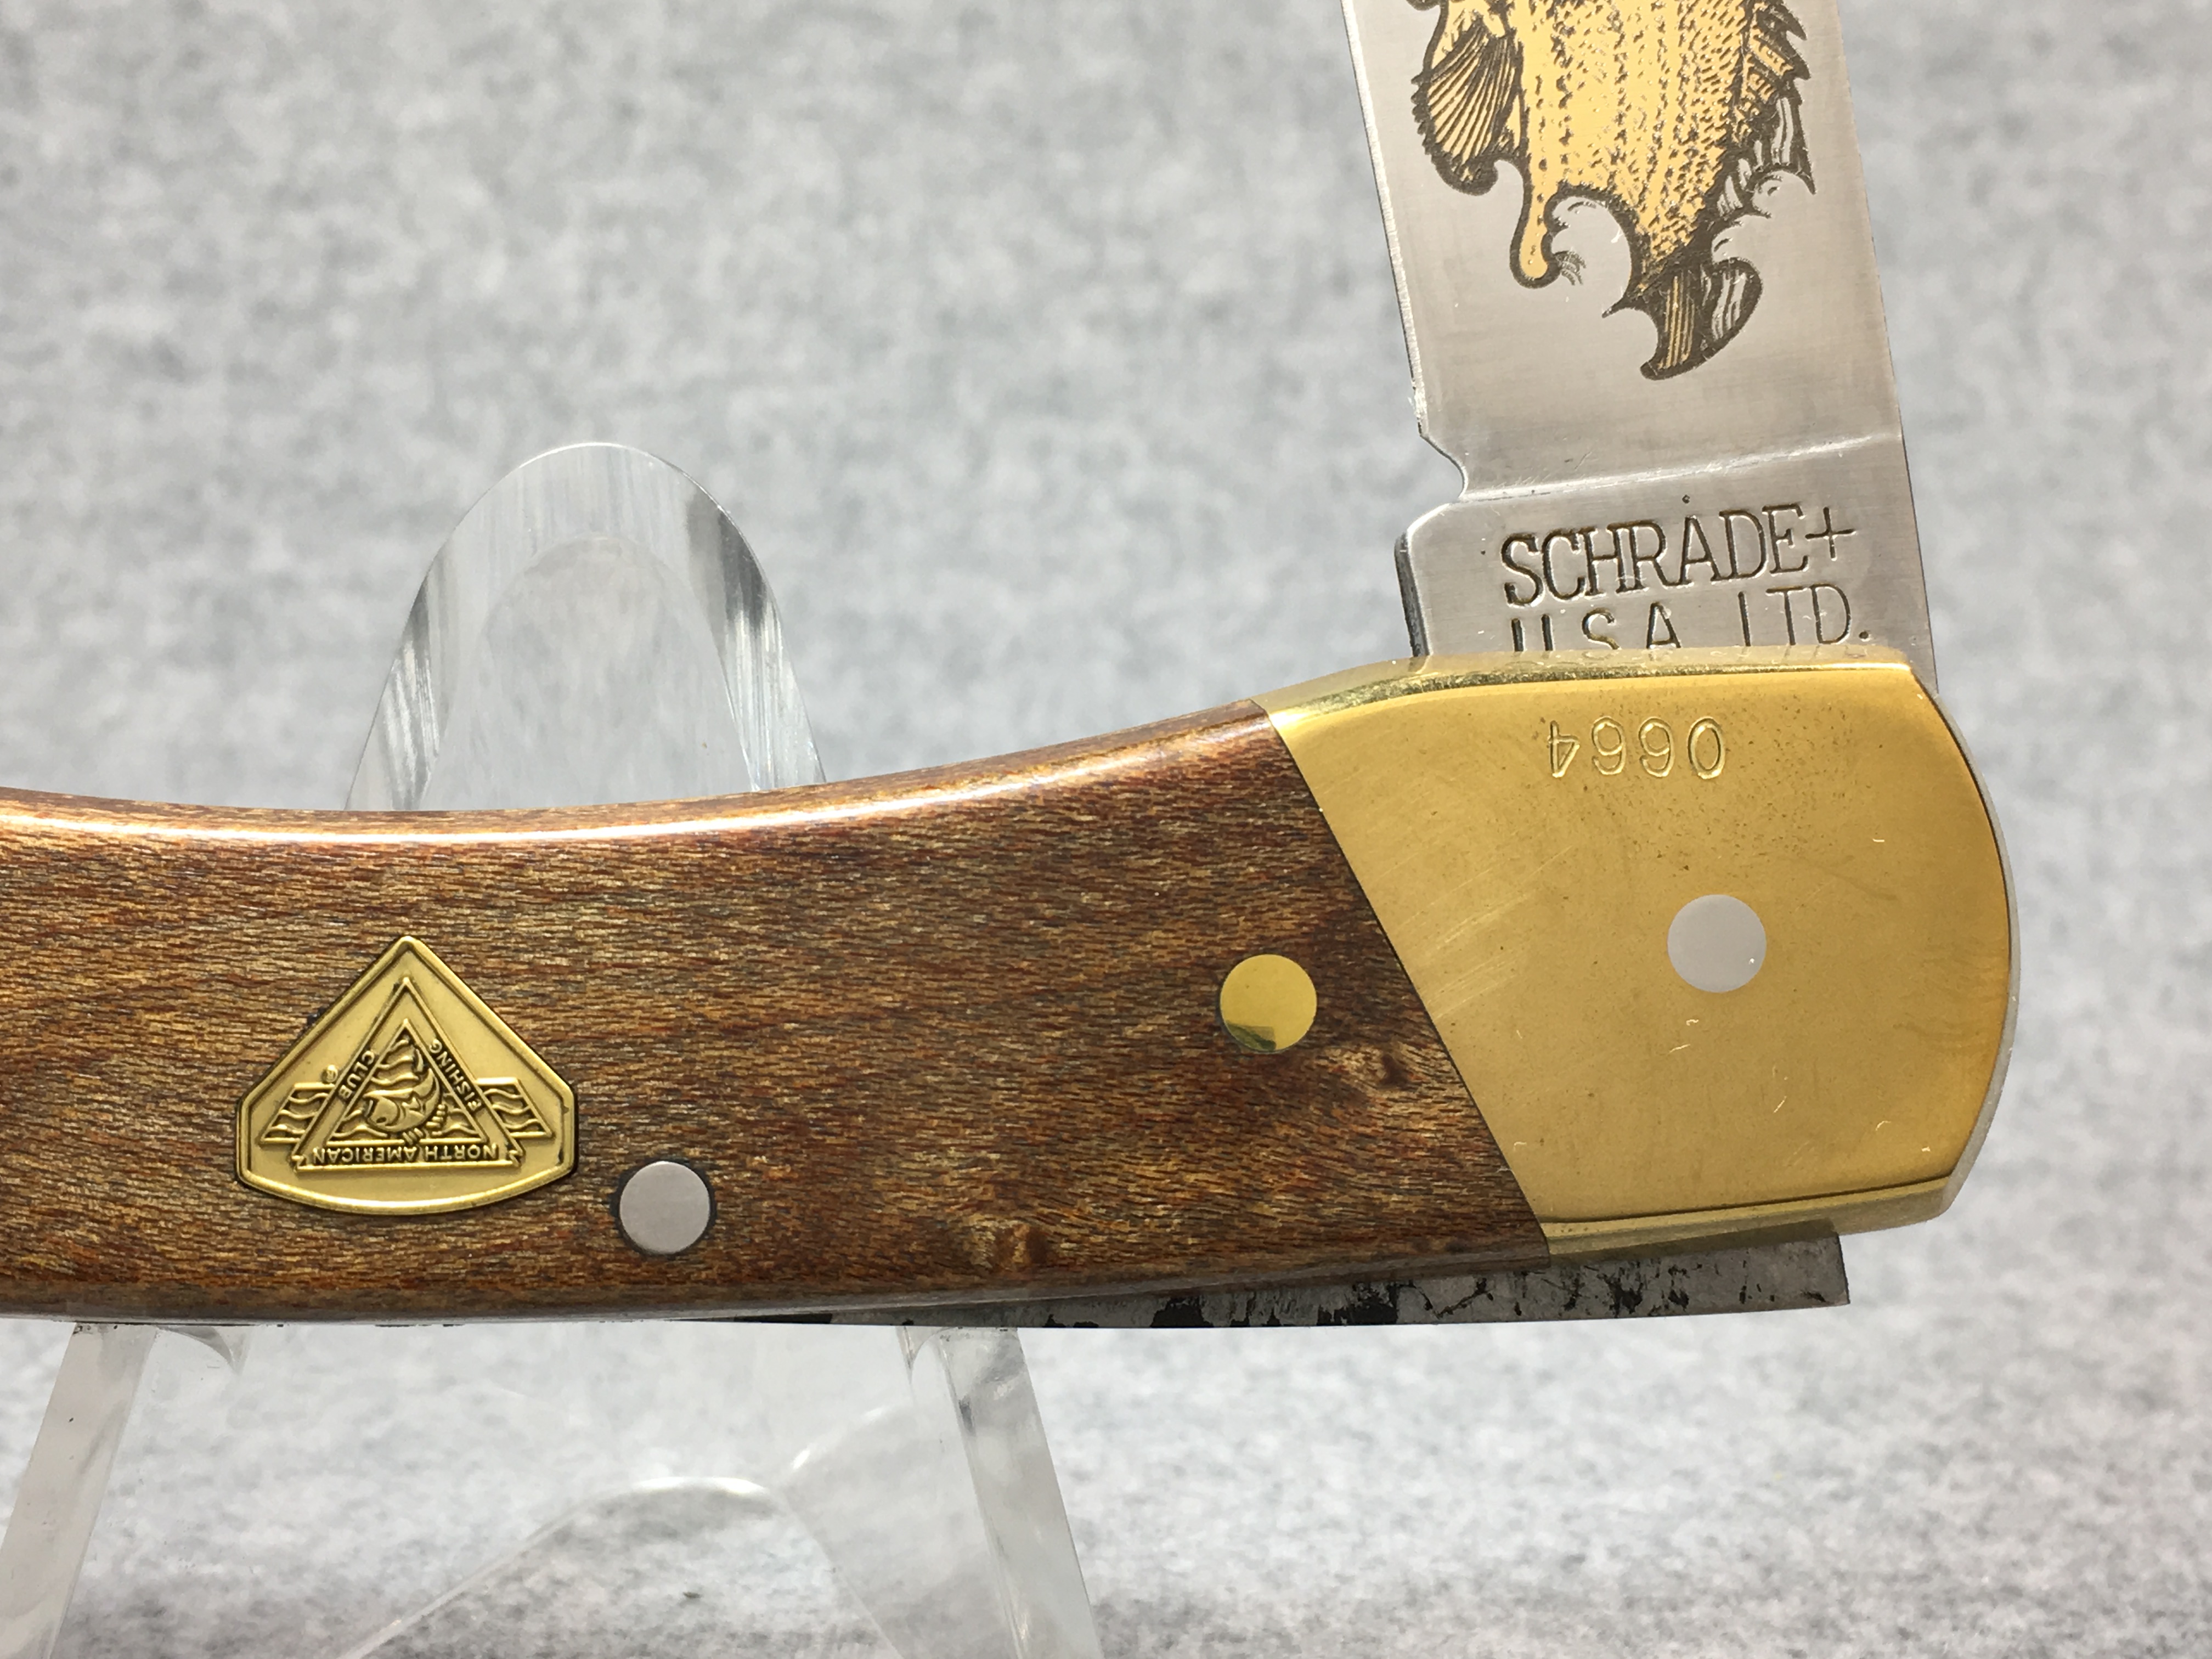 What is a 1998 SCHRADE+ USA Ltd 10TH ANNIVERSARY NORTH AMERICAN